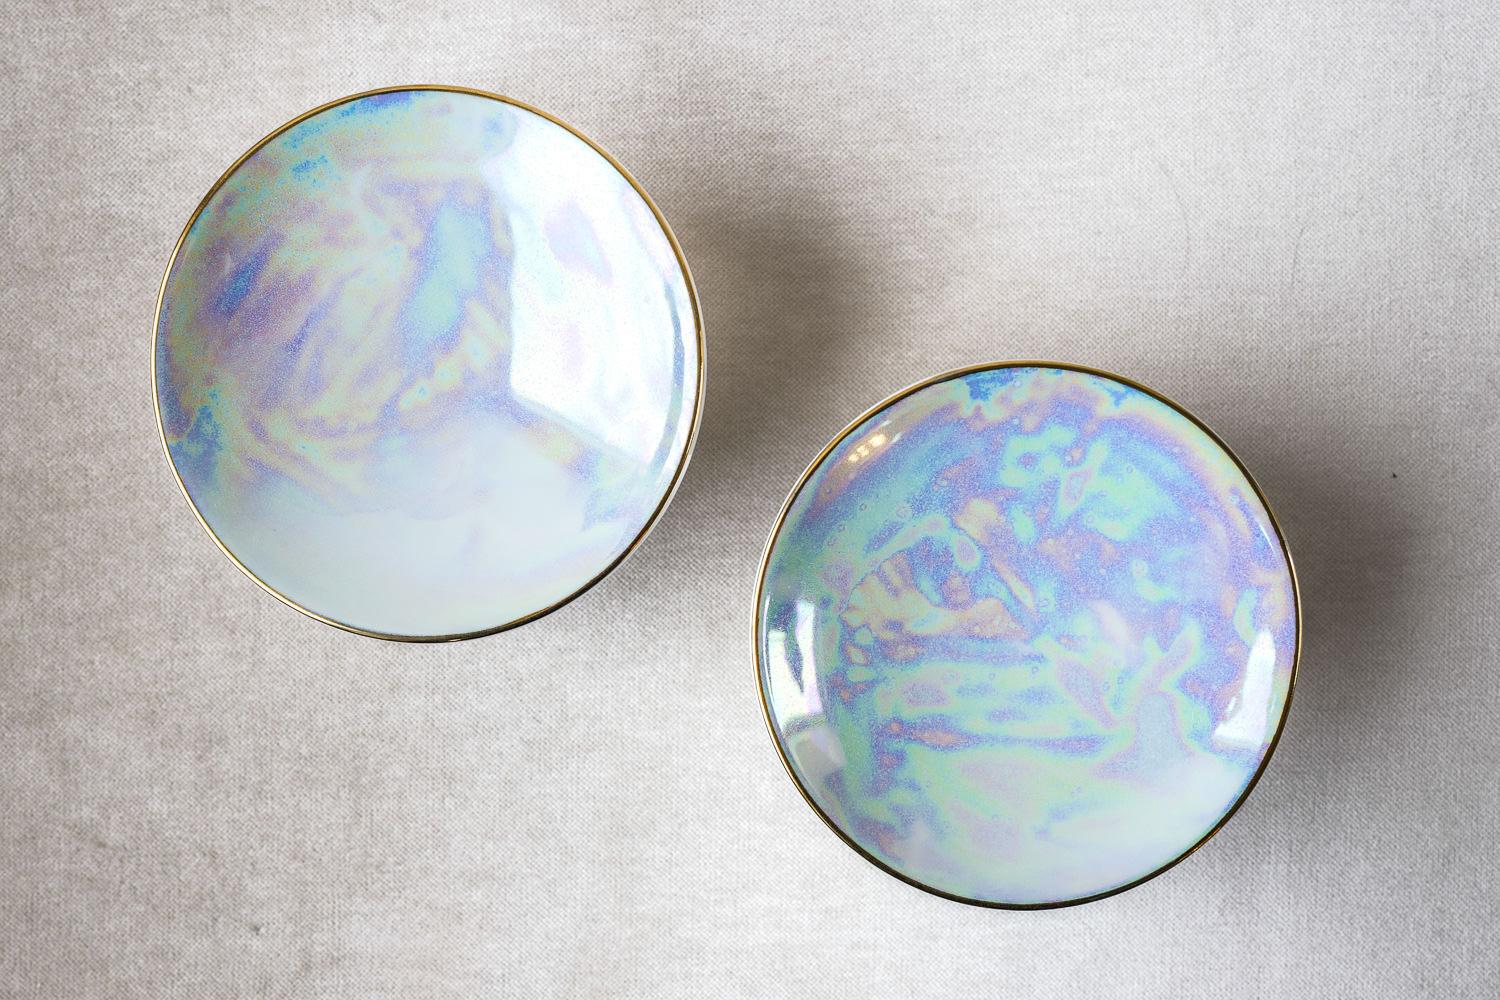 • Set of 2 medium porcelain side dishes
• 11,5 cm ø x 5,5 cm
• perfect for a sexy amuse-bouche, a pre-dessert or side dish
• also works for the essential butter on the table
• with a glamorous iridescent glaze, textured bottom
• and a very